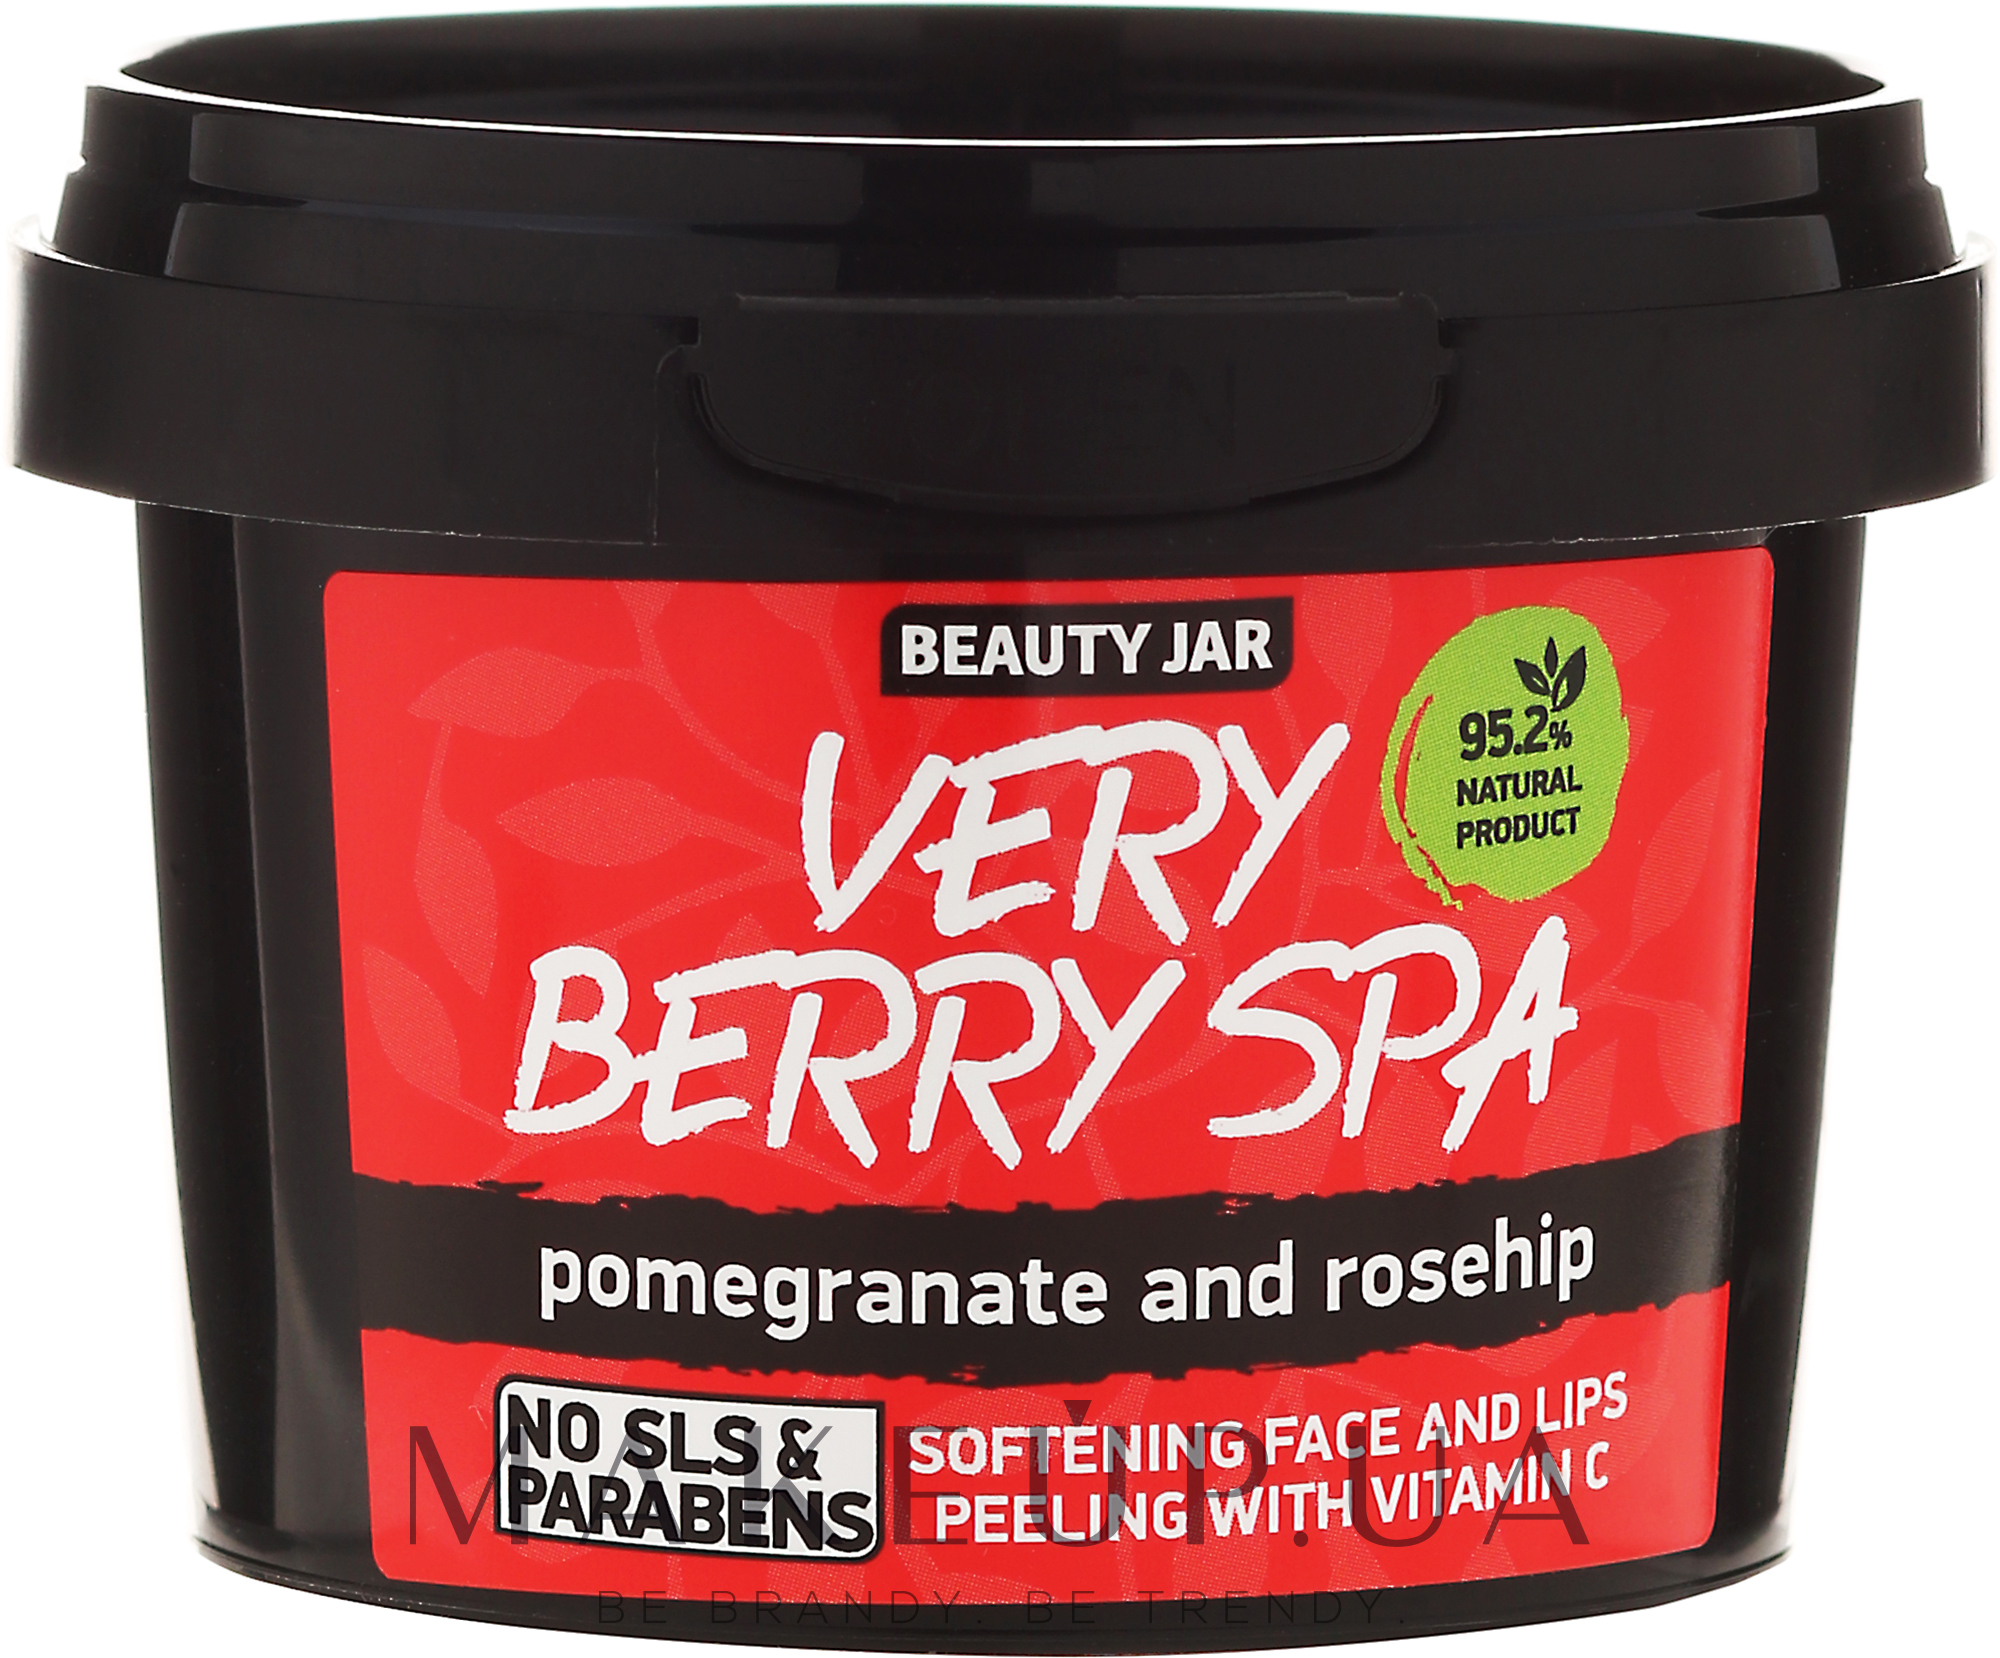 Скраб для лица и губ "Very Berry Spa" - Beauty Jar Softening Face And Lips Peeling With Vitamin C — фото 120g